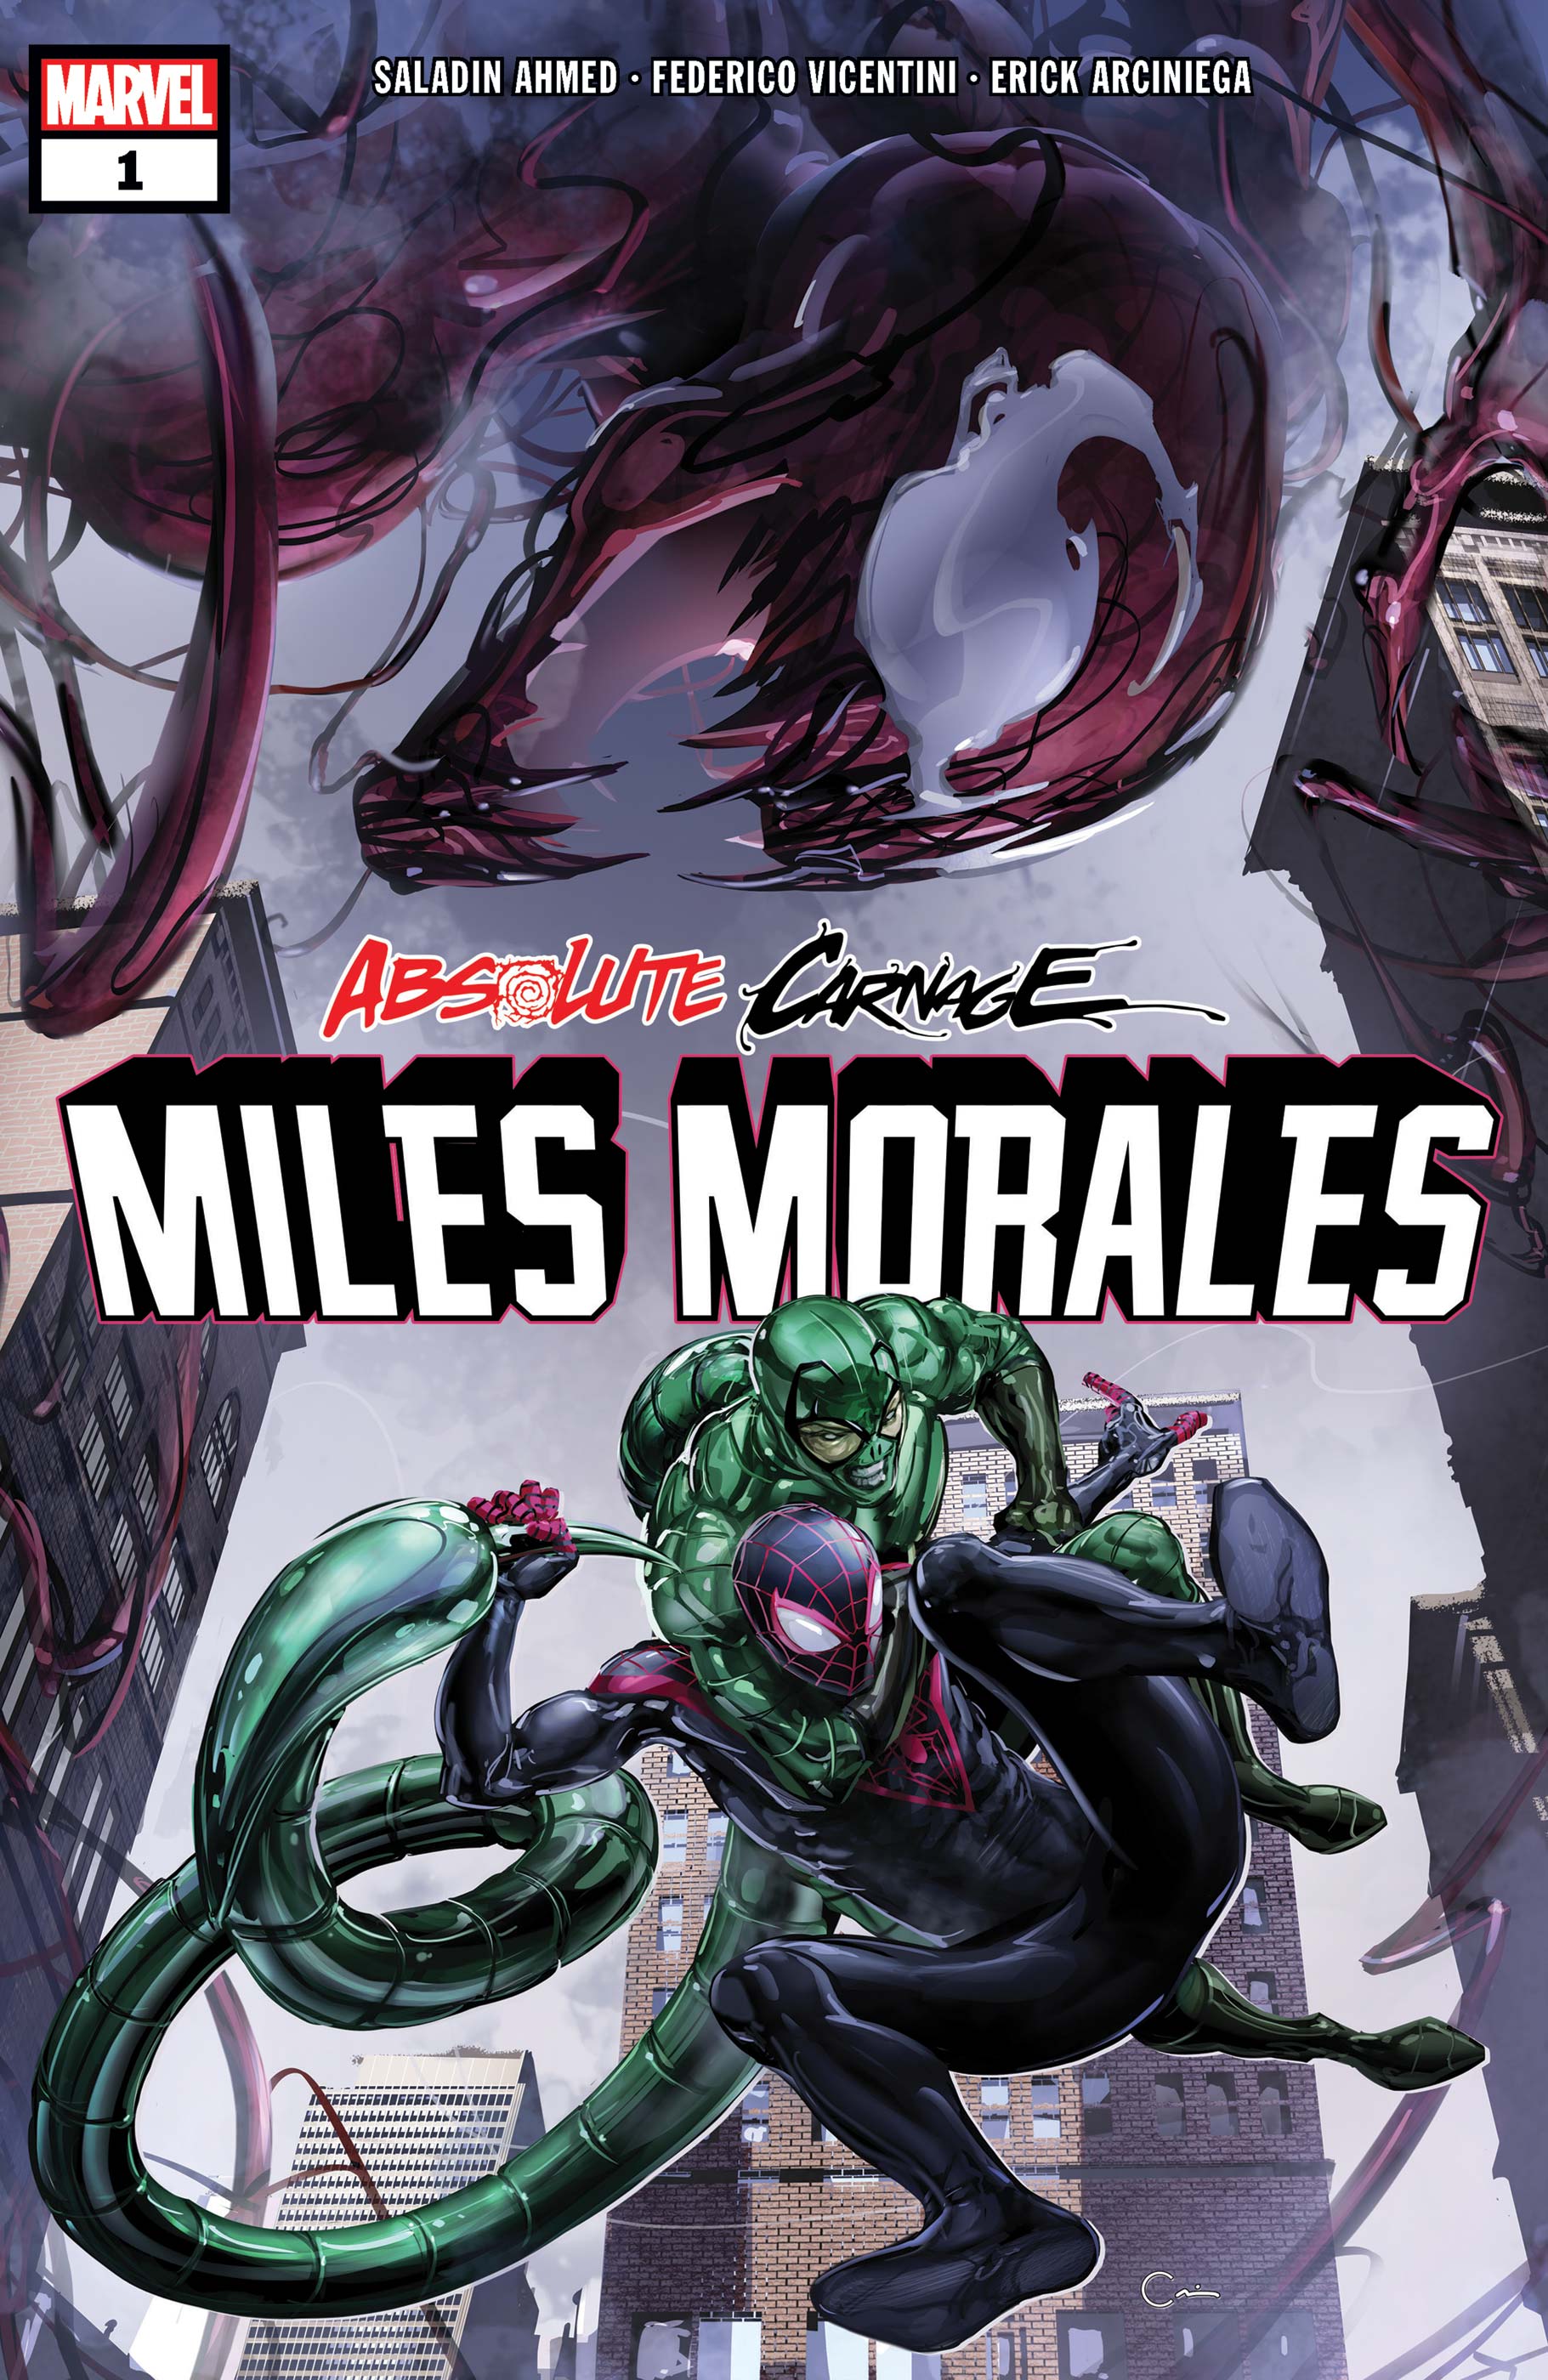 Absolute Carnage: Miles Morales (2019) #1